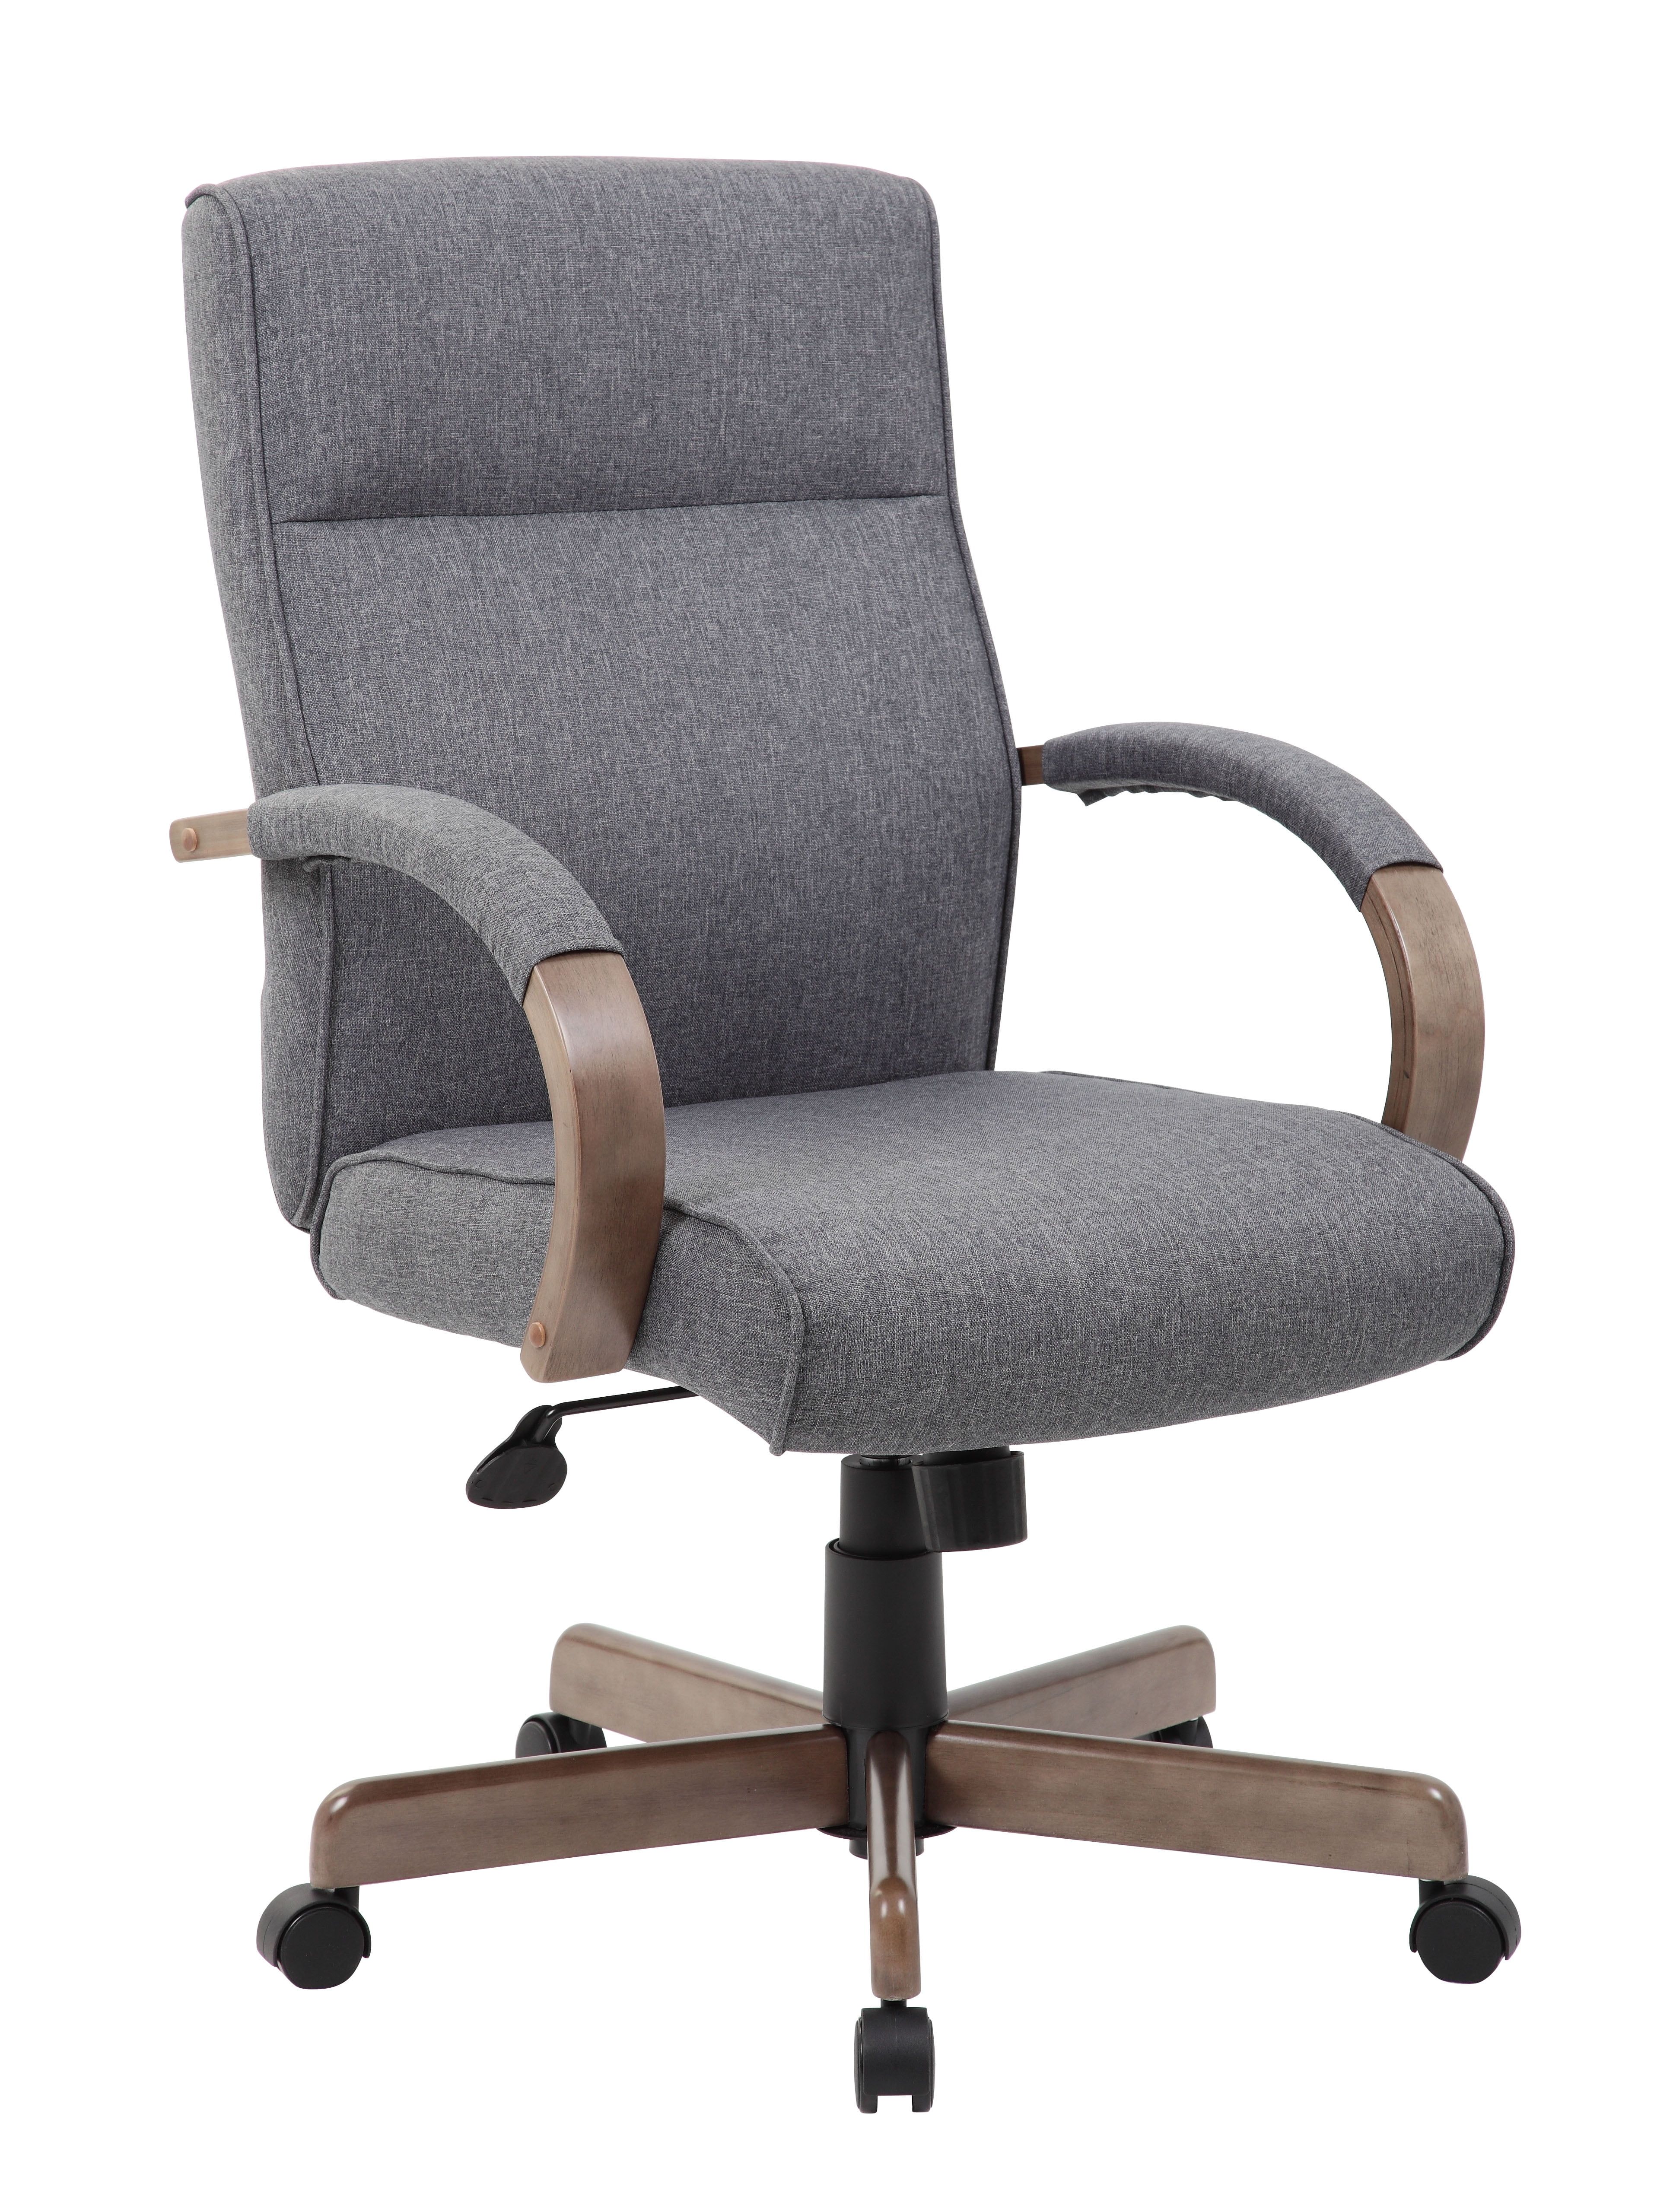 Boss Office & Home Reclaim Modern Executive Conference or Desk Chair | Walmart (US)